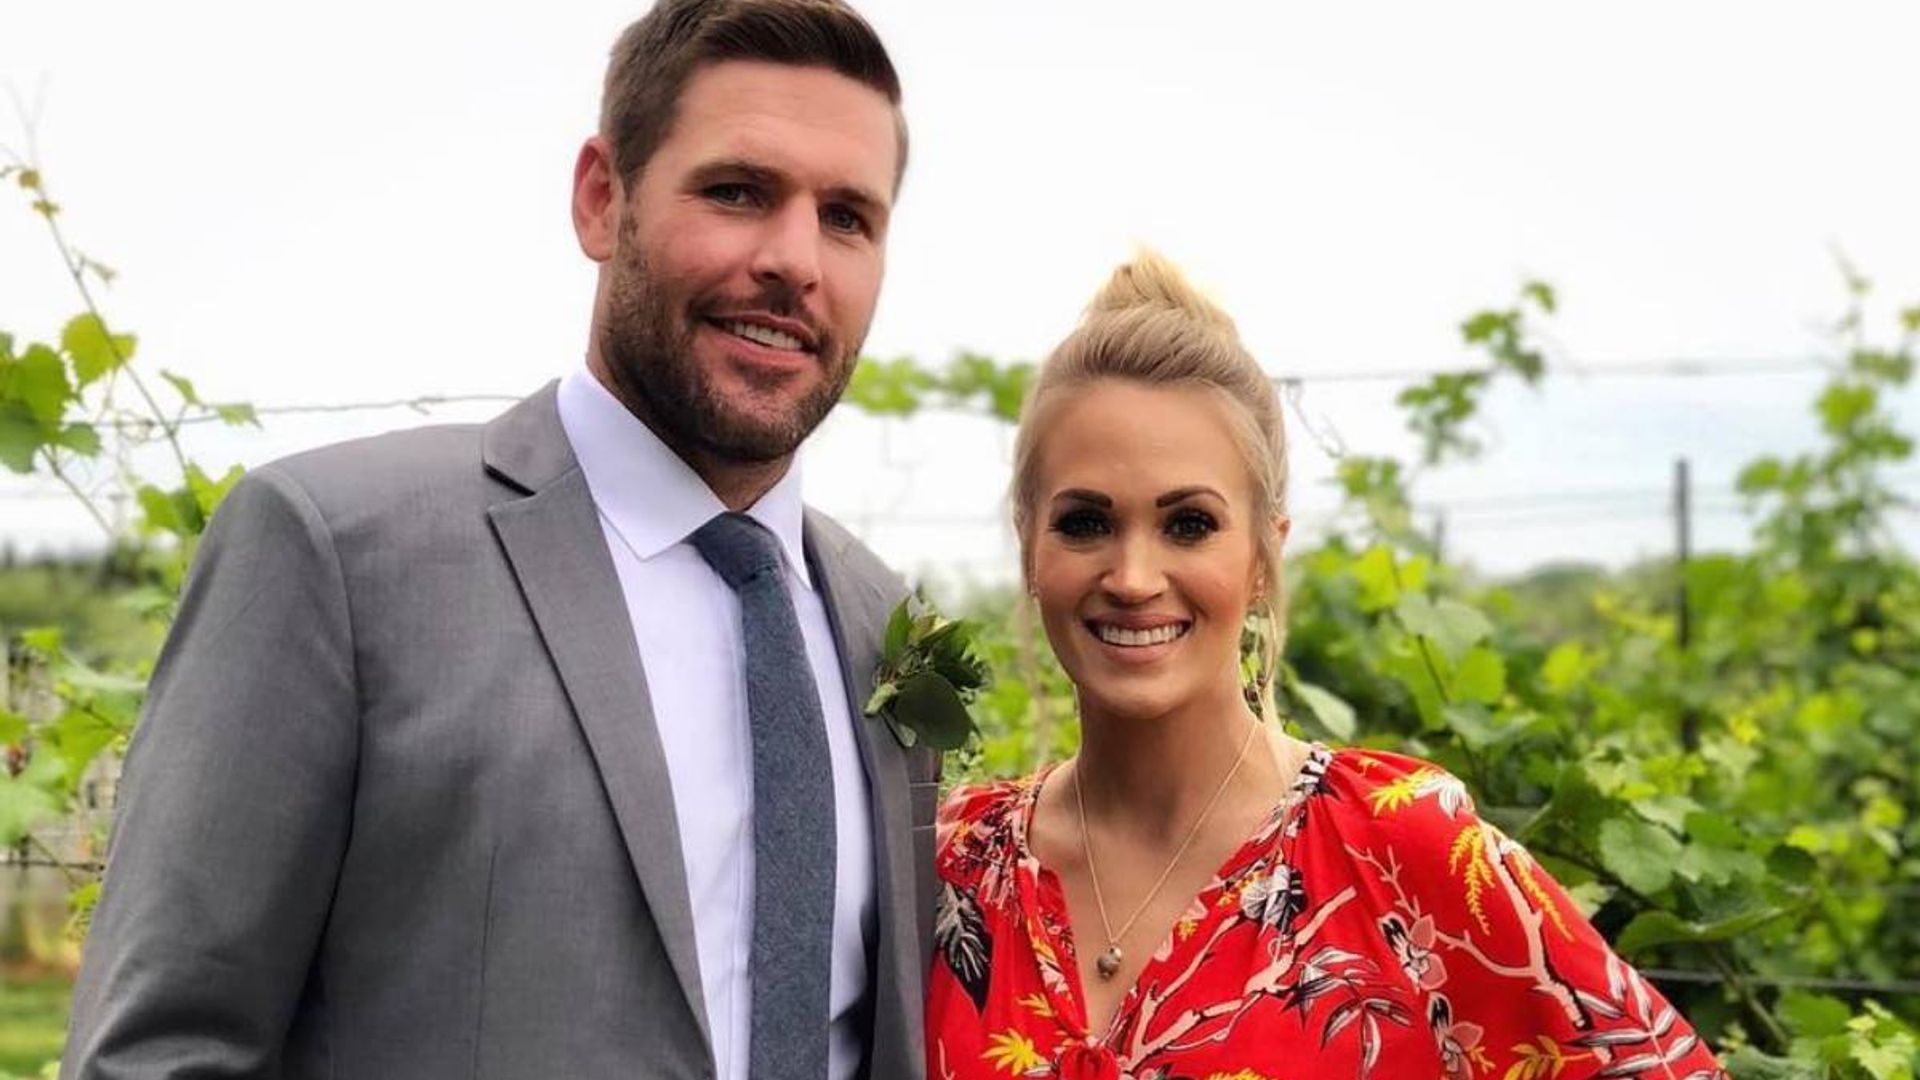 Carrie Underwood's husband announces personal news in rare social media post